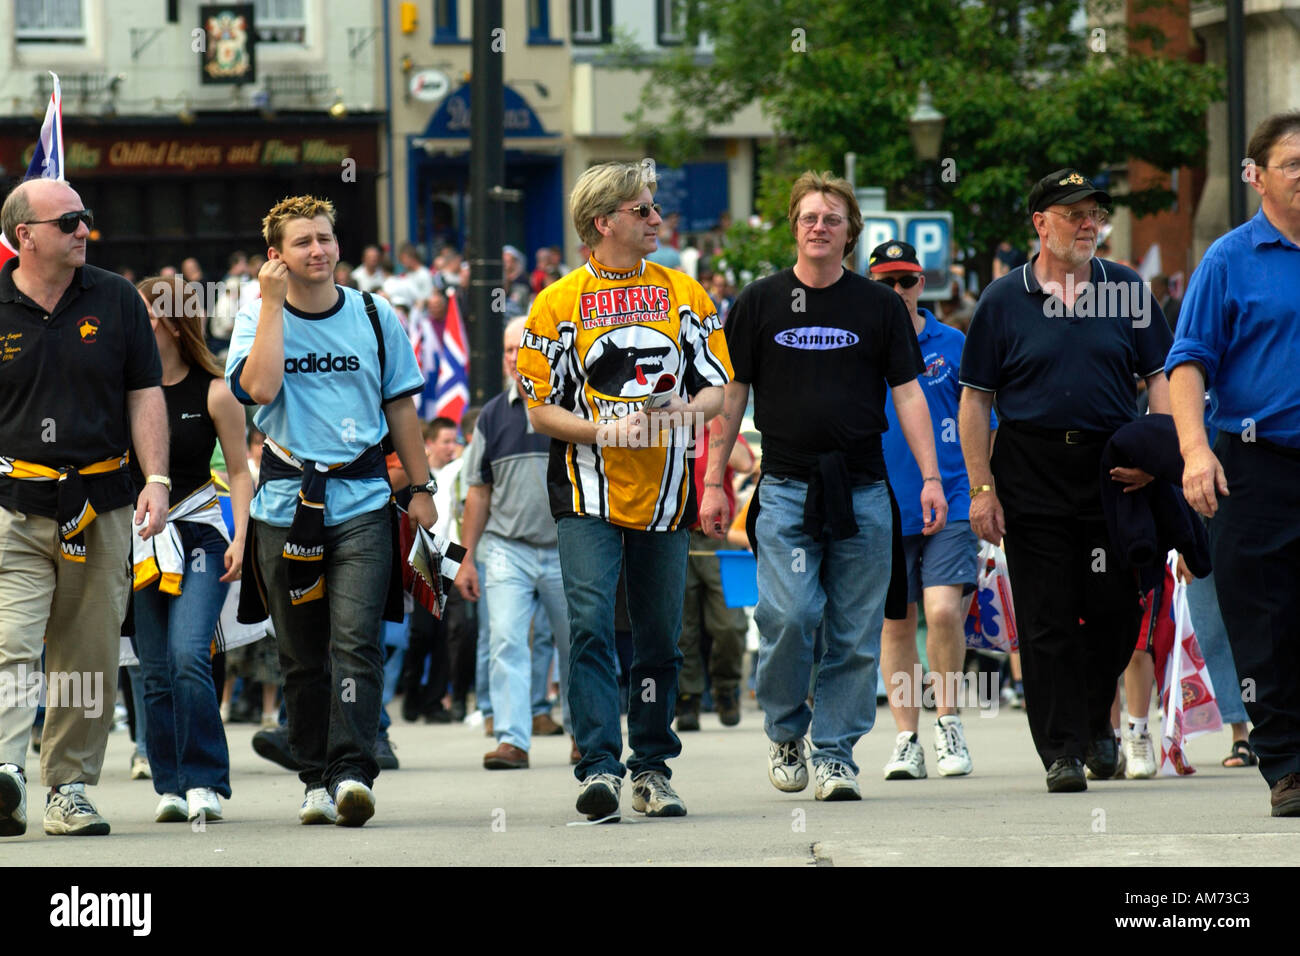 Speedway fans walk in streets of Cardiff for Speedway Grand Prix Stock Photo